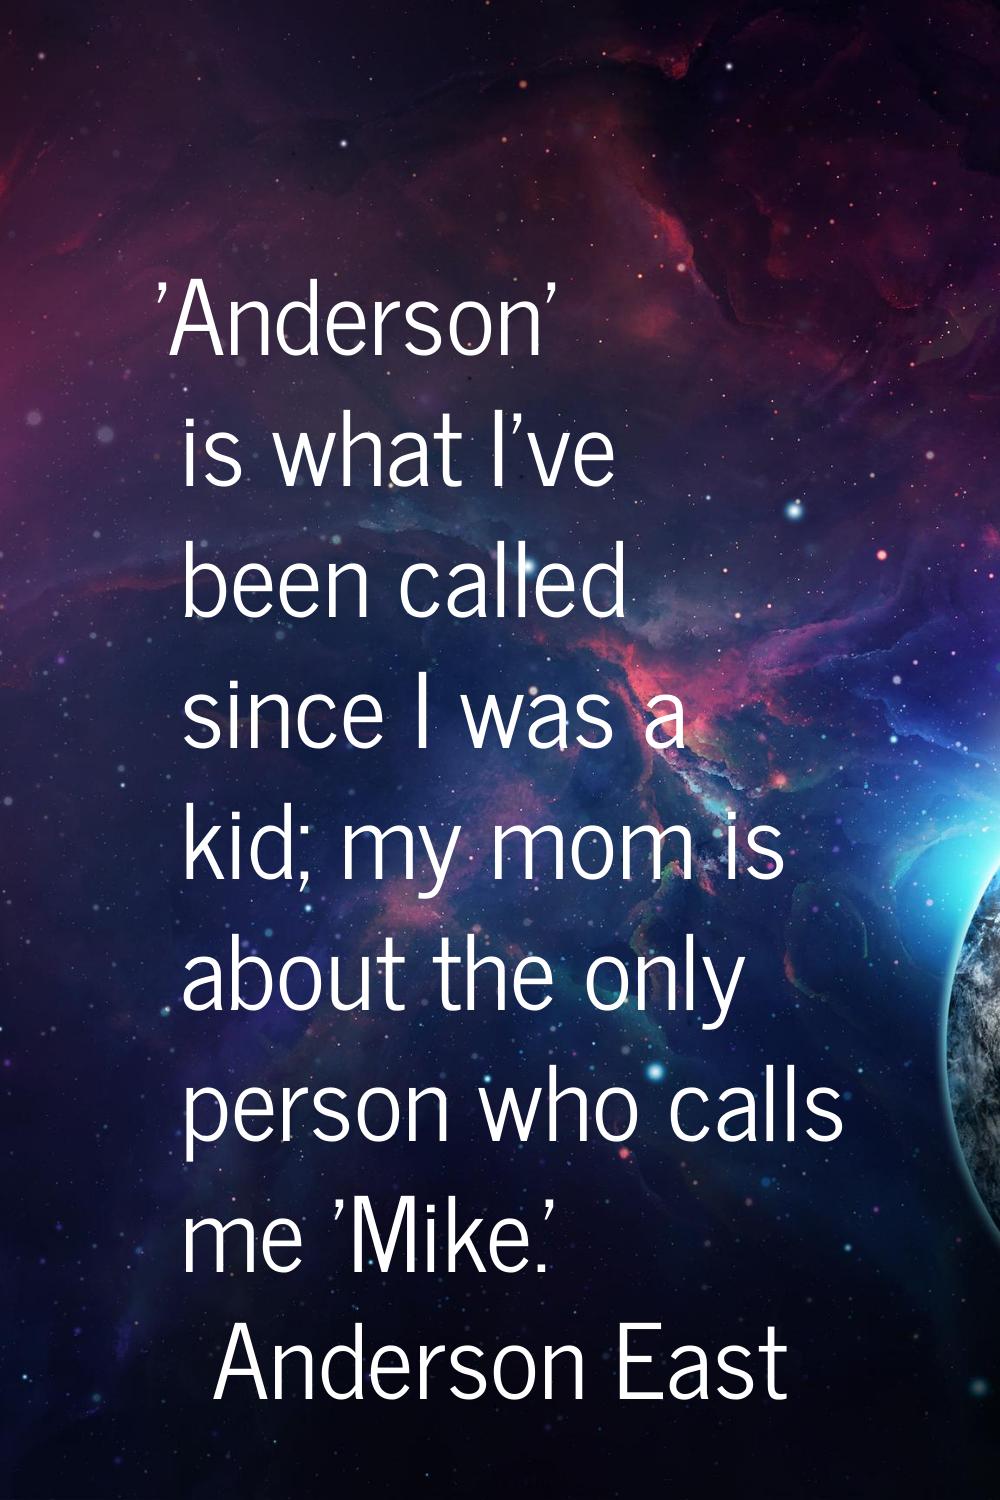 'Anderson' is what I've been called since I was a kid; my mom is about the only person who calls me